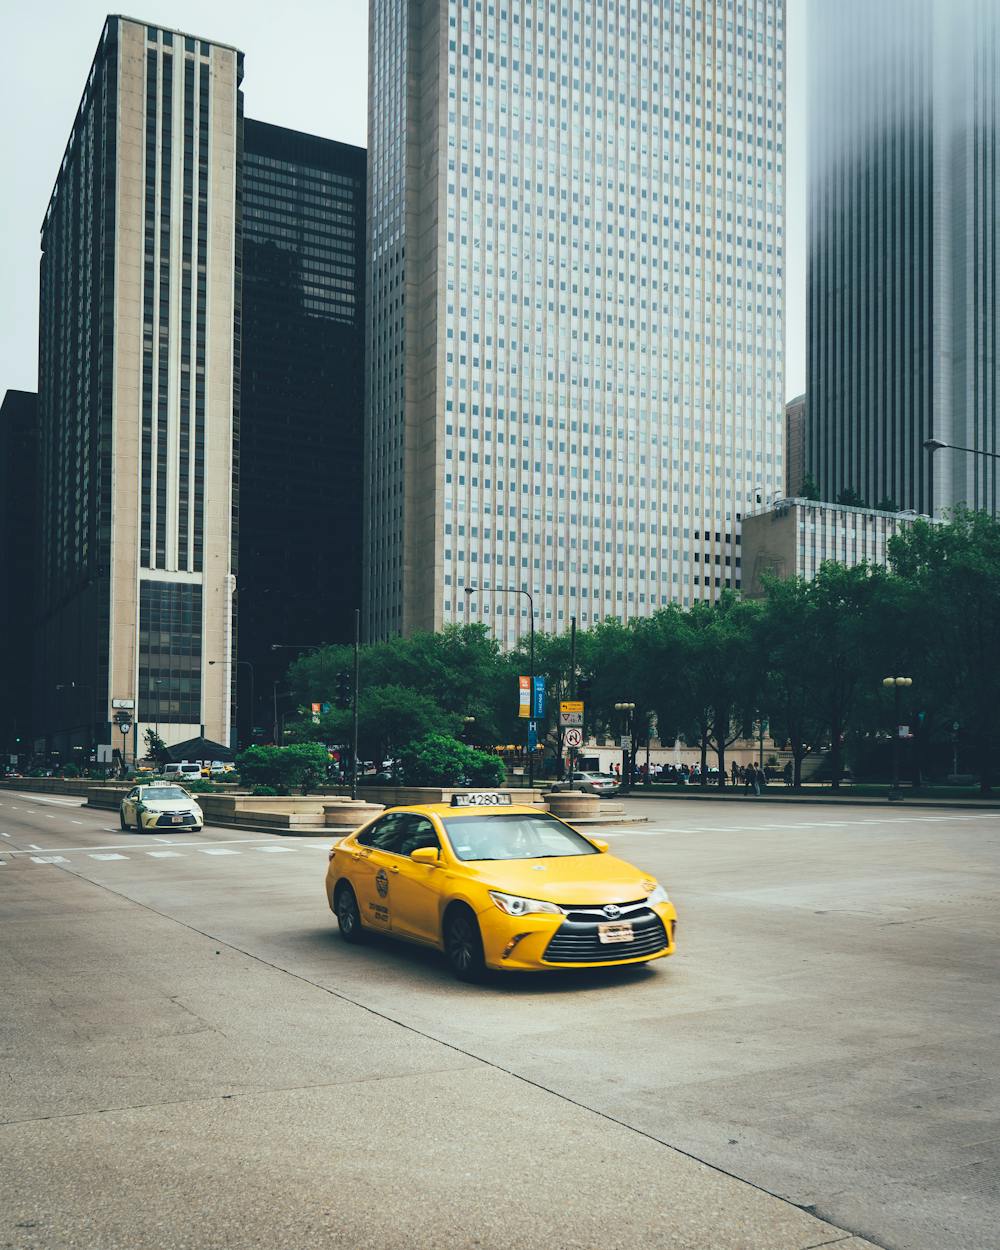 A yellow cab on the road. | Photo:Pexels